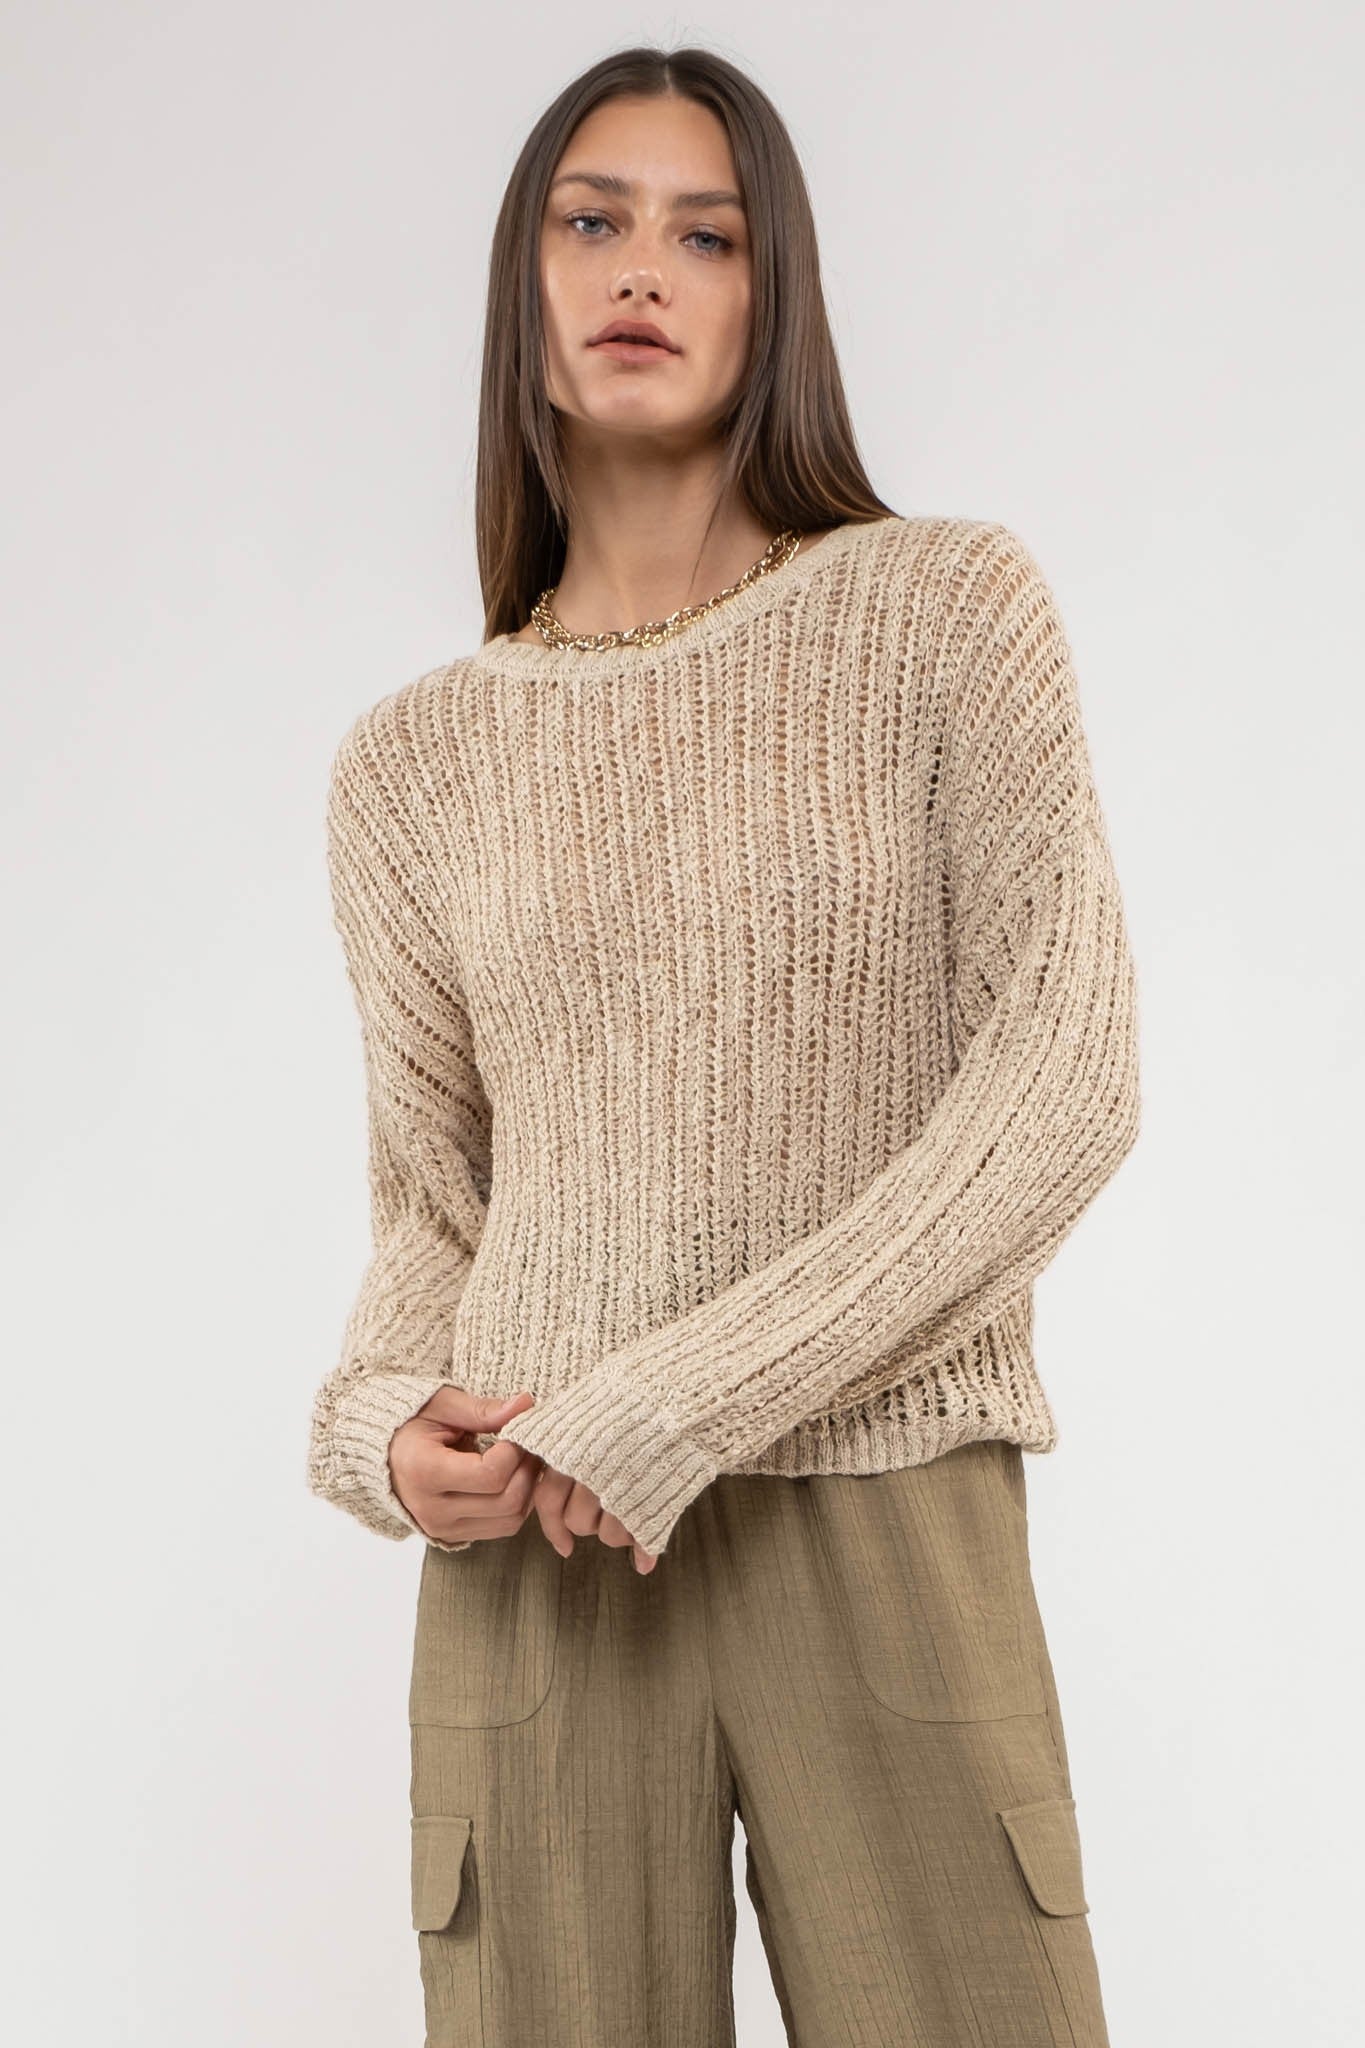 Sheer Knit Pullover Sweater (4 Colors)